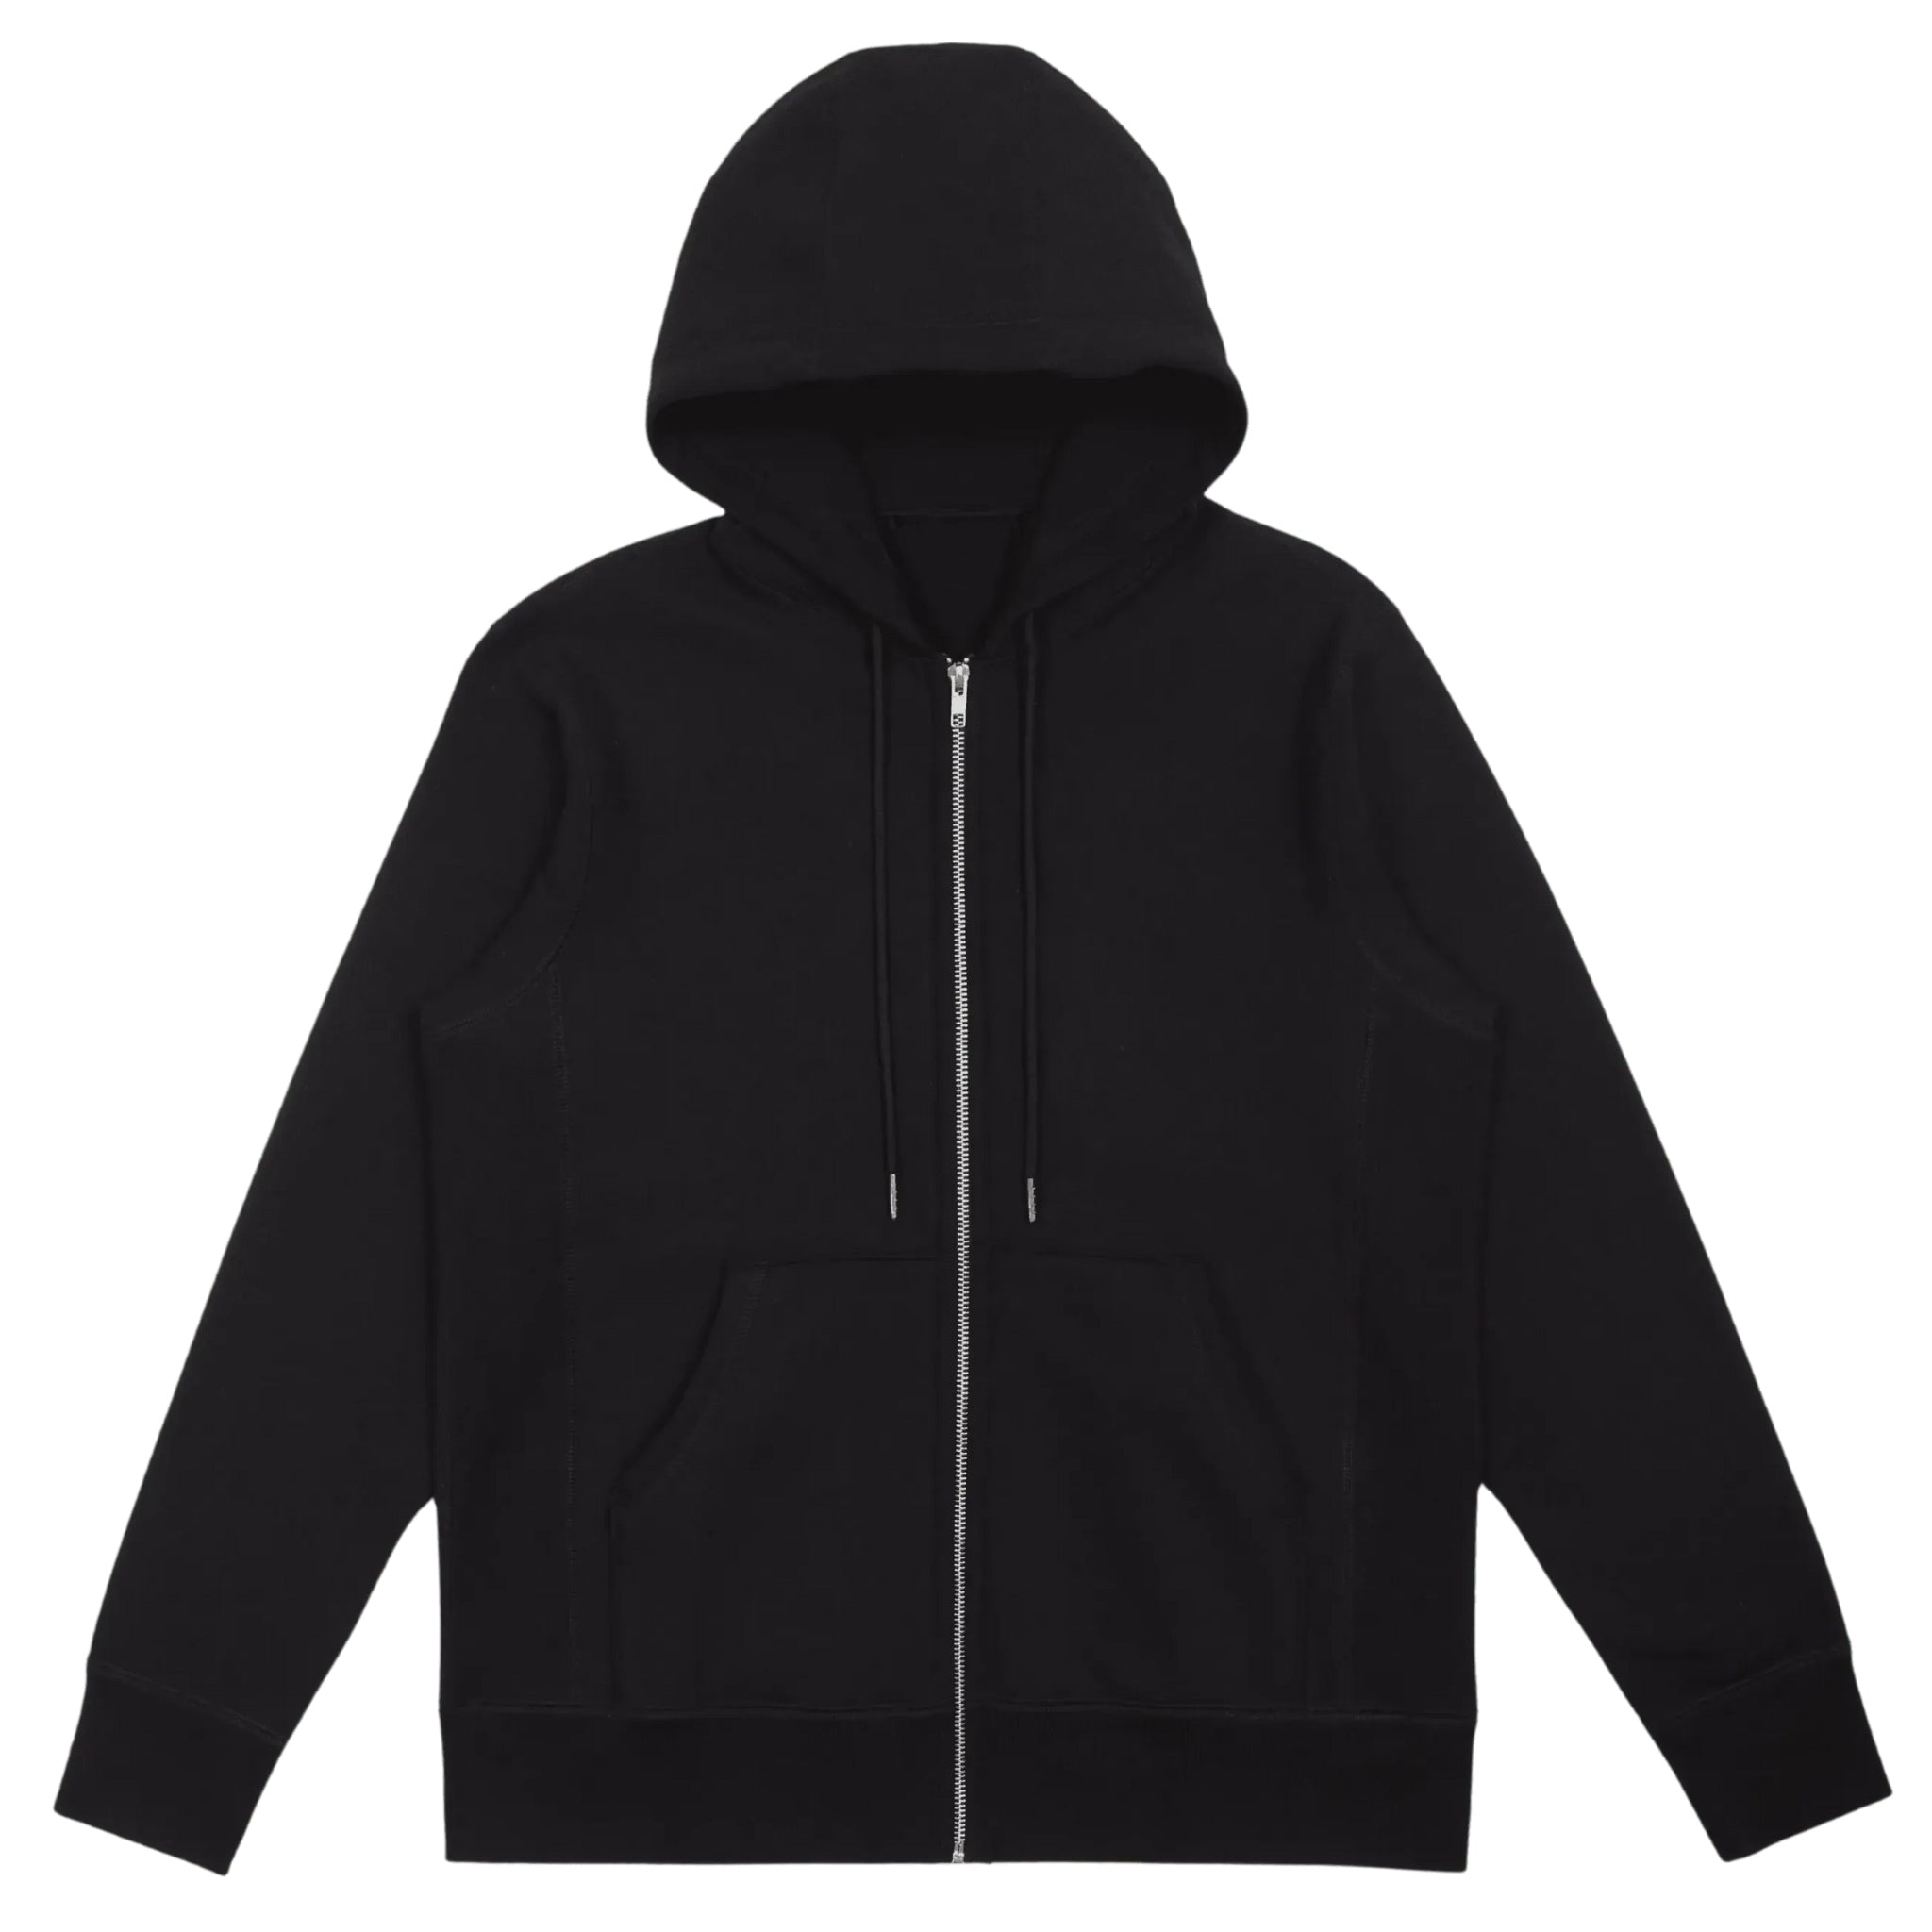 Front view of heavyweight zip hoodie in black cotton on a white background